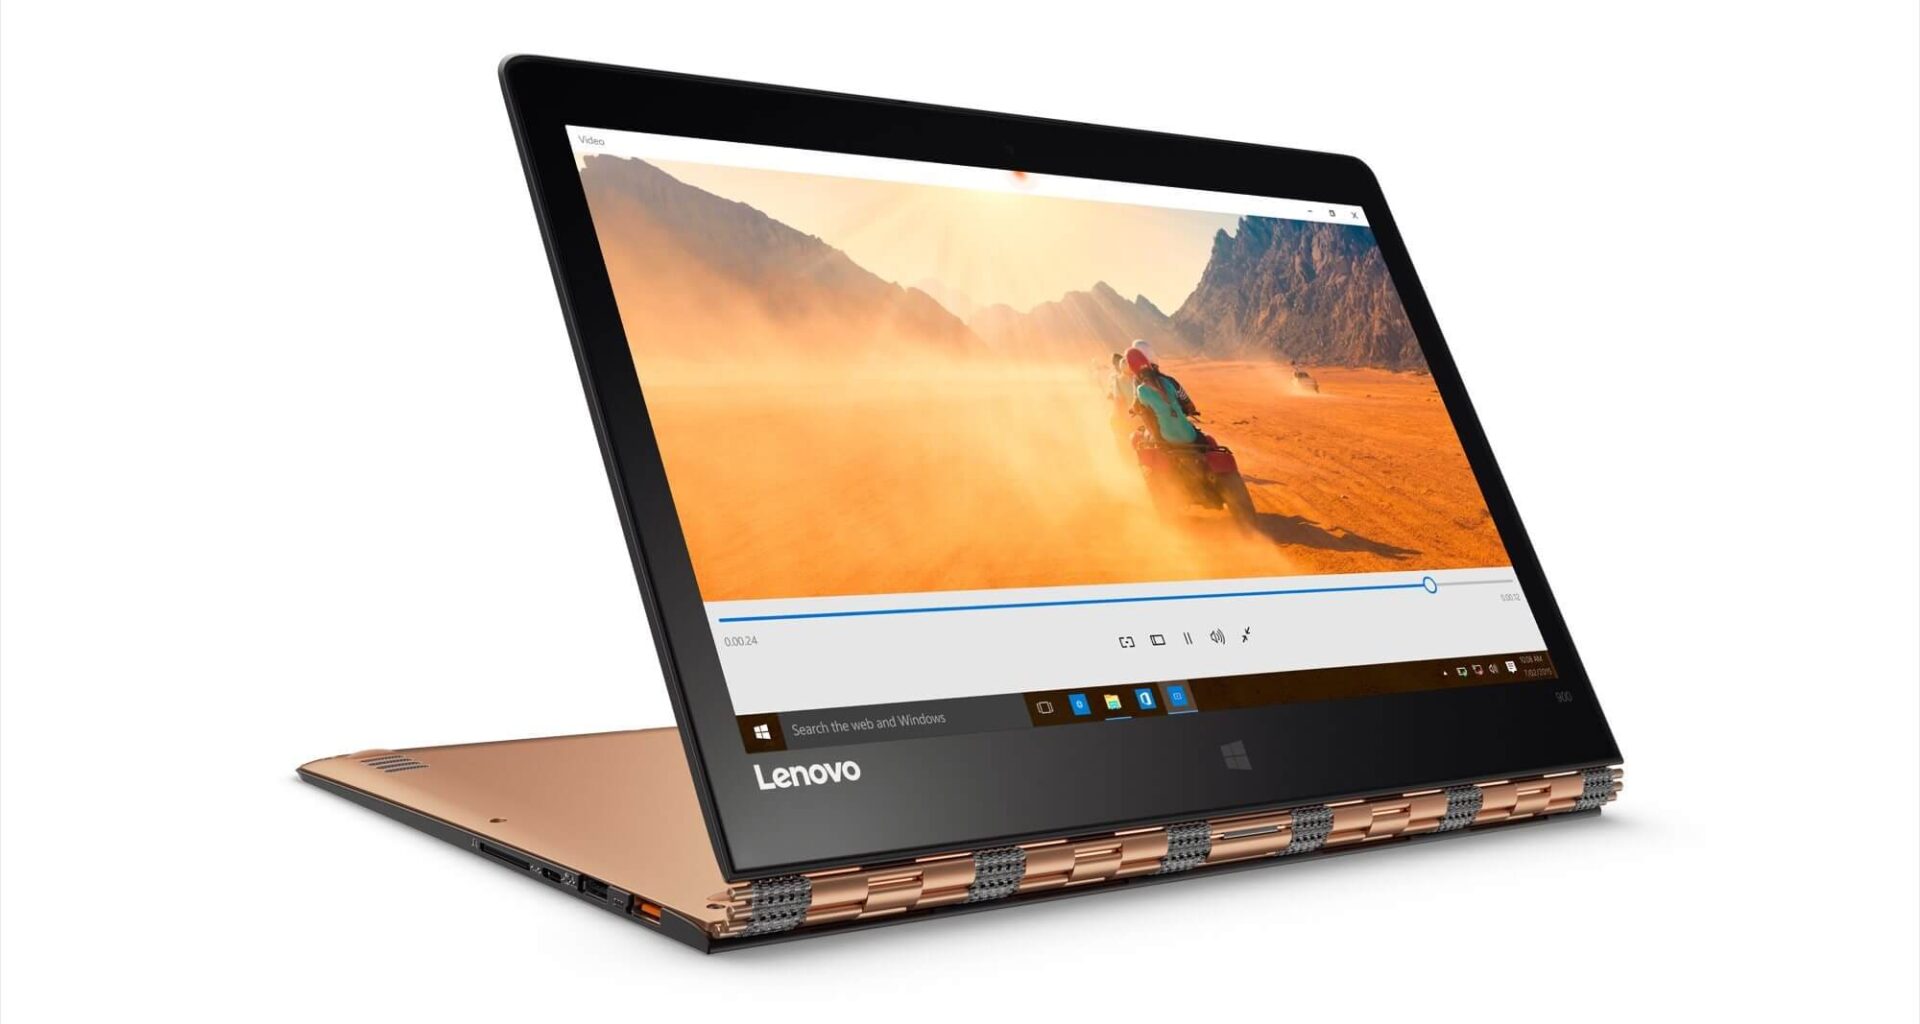 Yoga 900 showing watchband hinge screen in stand mode champagne gold